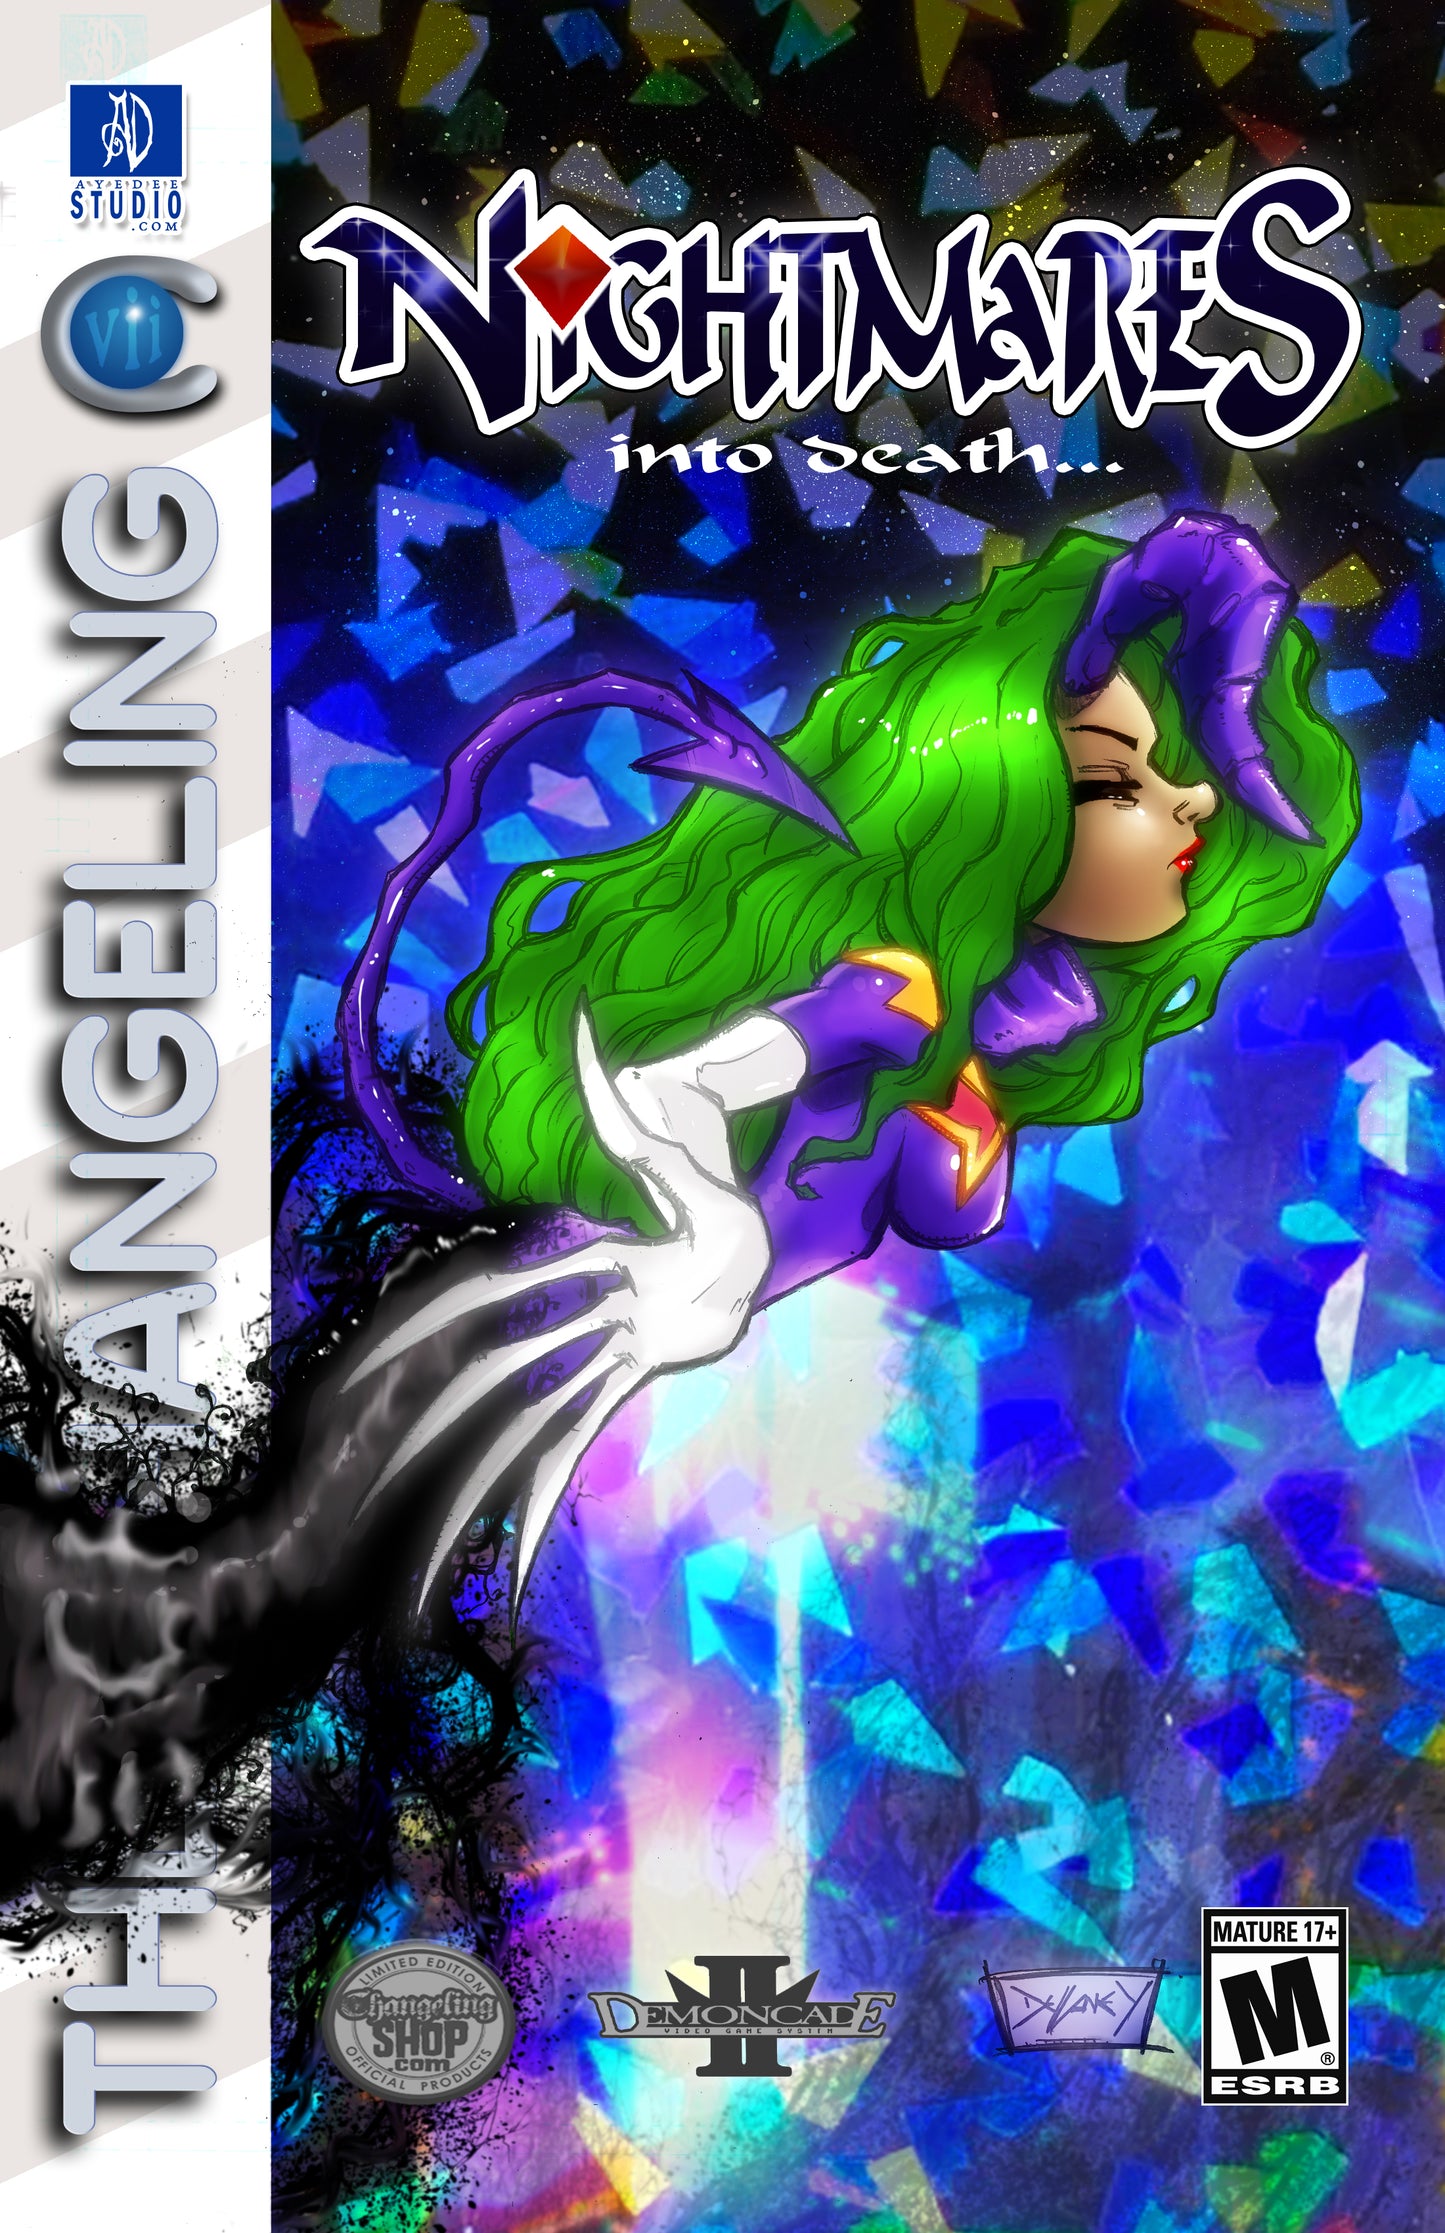 The Changeling Issue 7 Nightmares Into Death Editions